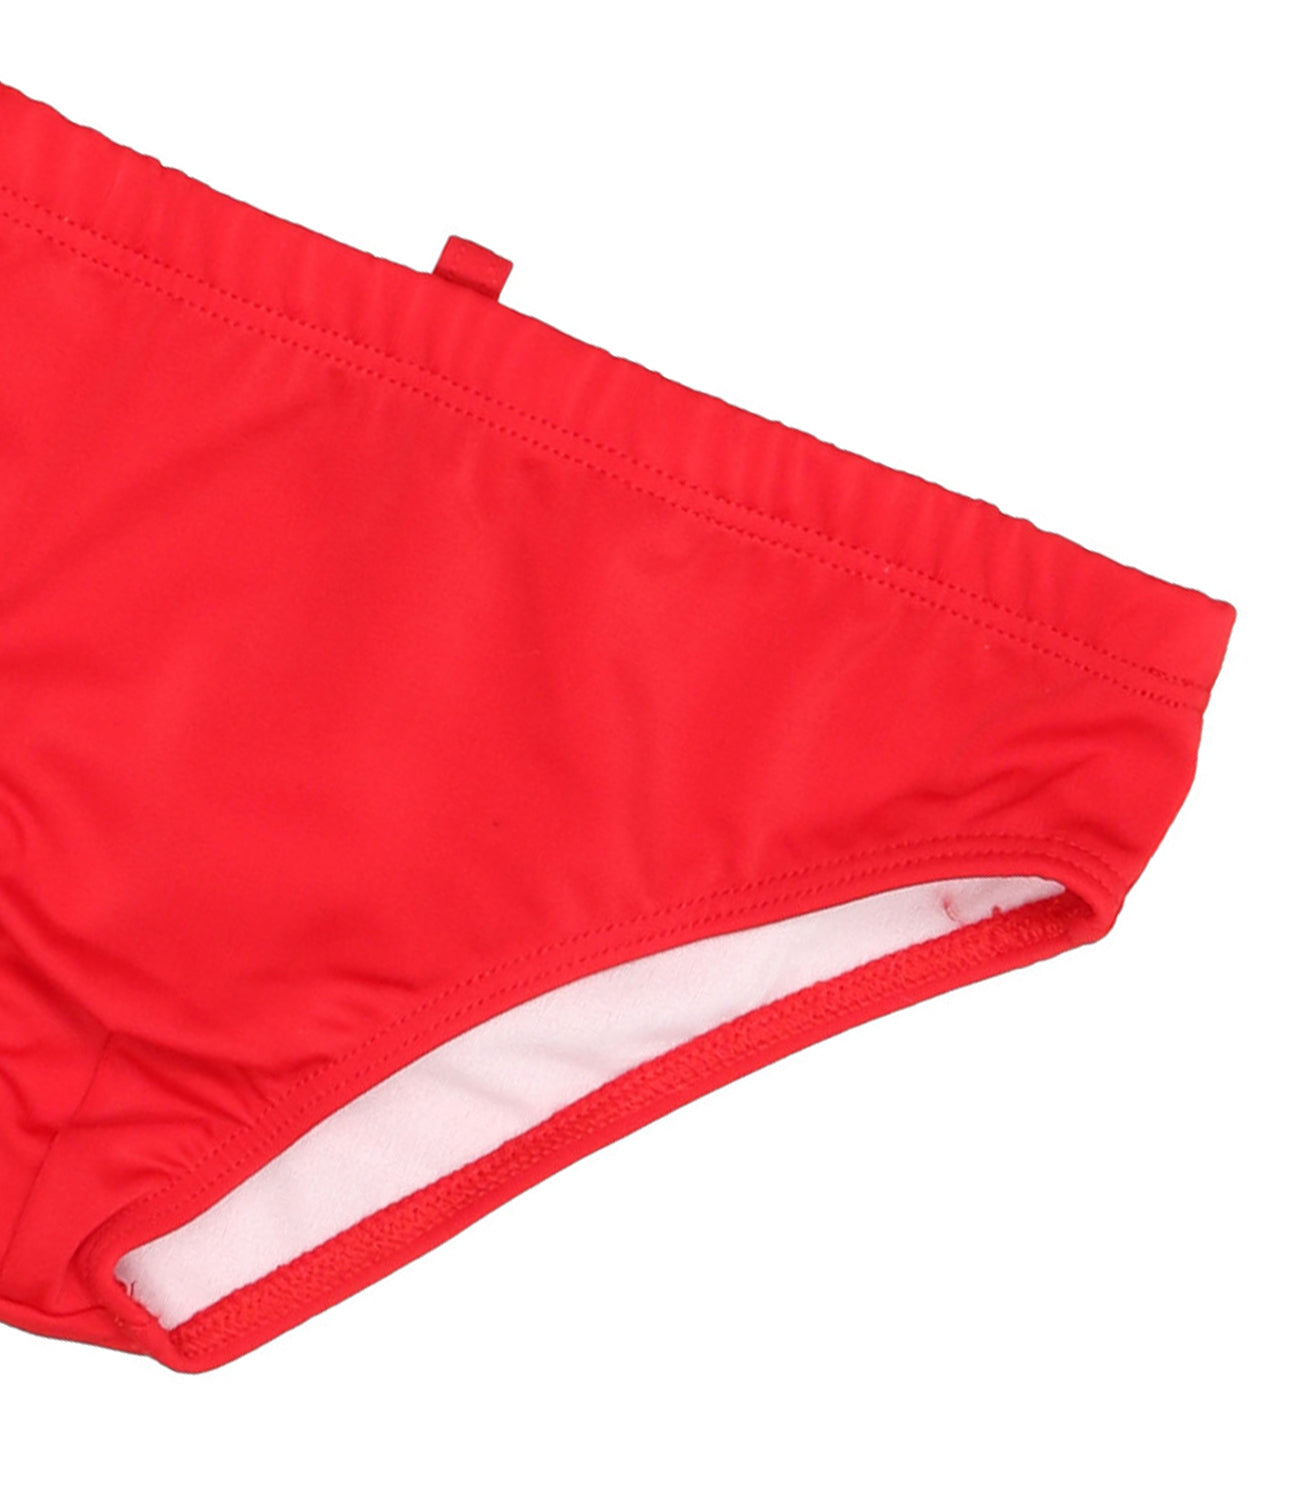 Dsquared2 | Swimsuit Briefs Red